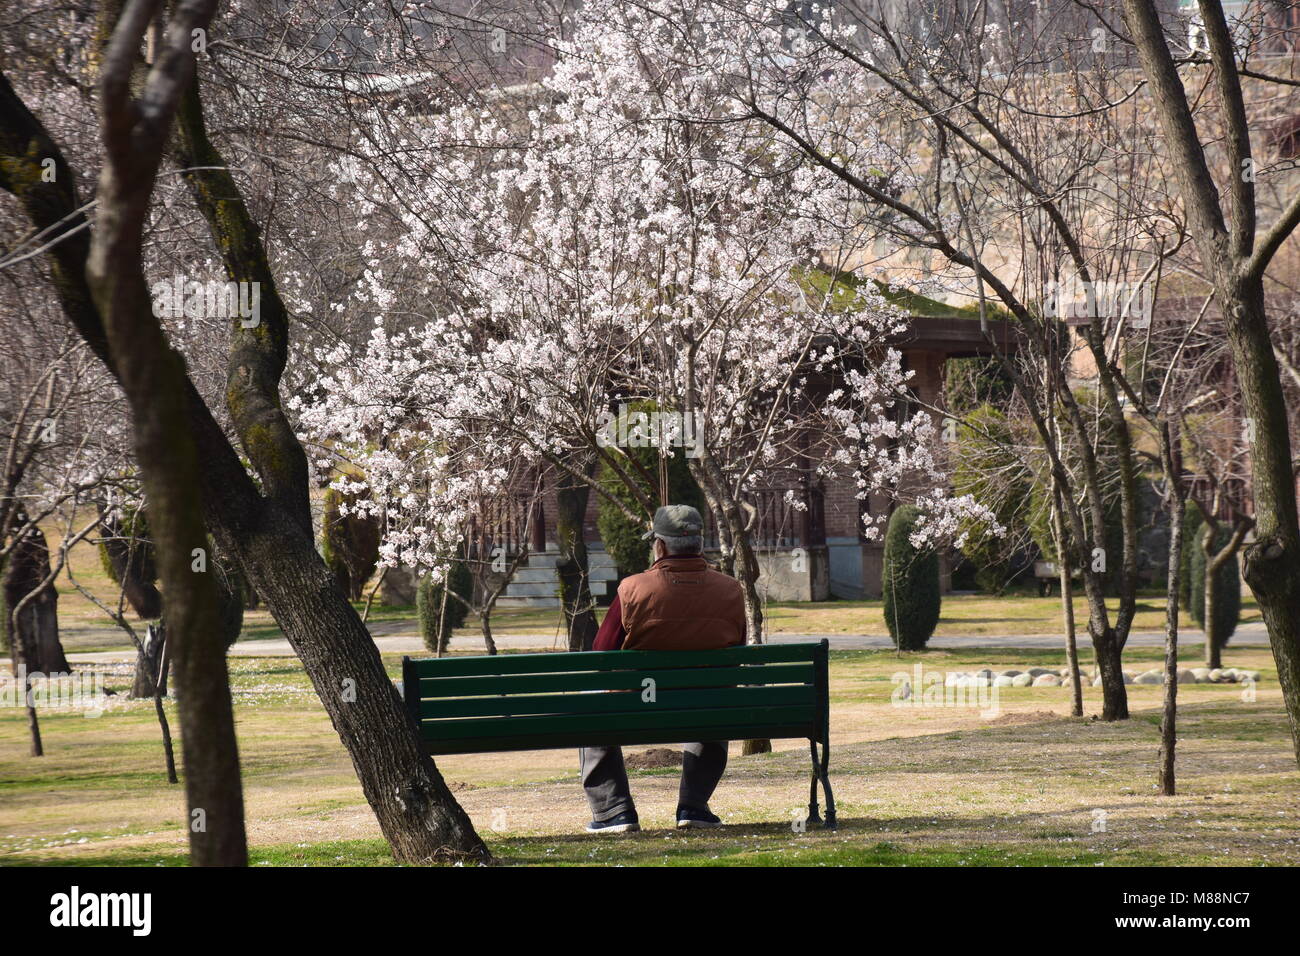 Srinagar, India. 10th Mar, 2018. Kashmiri man enjoys in the bloomed almond trees in an almond orchard known by Badam Waer In Srinagar. The white and pink flowers of Almond trees are in full blossom which predicts the coming of spring. Almond trees are in full blossom due to early summer-like weather conditions in Kashmir valley, where very less snow was experienced this winter as compared to previous years. Credit: Abbas Idrees/Pacific Press/Alamy Live News Stock Photo